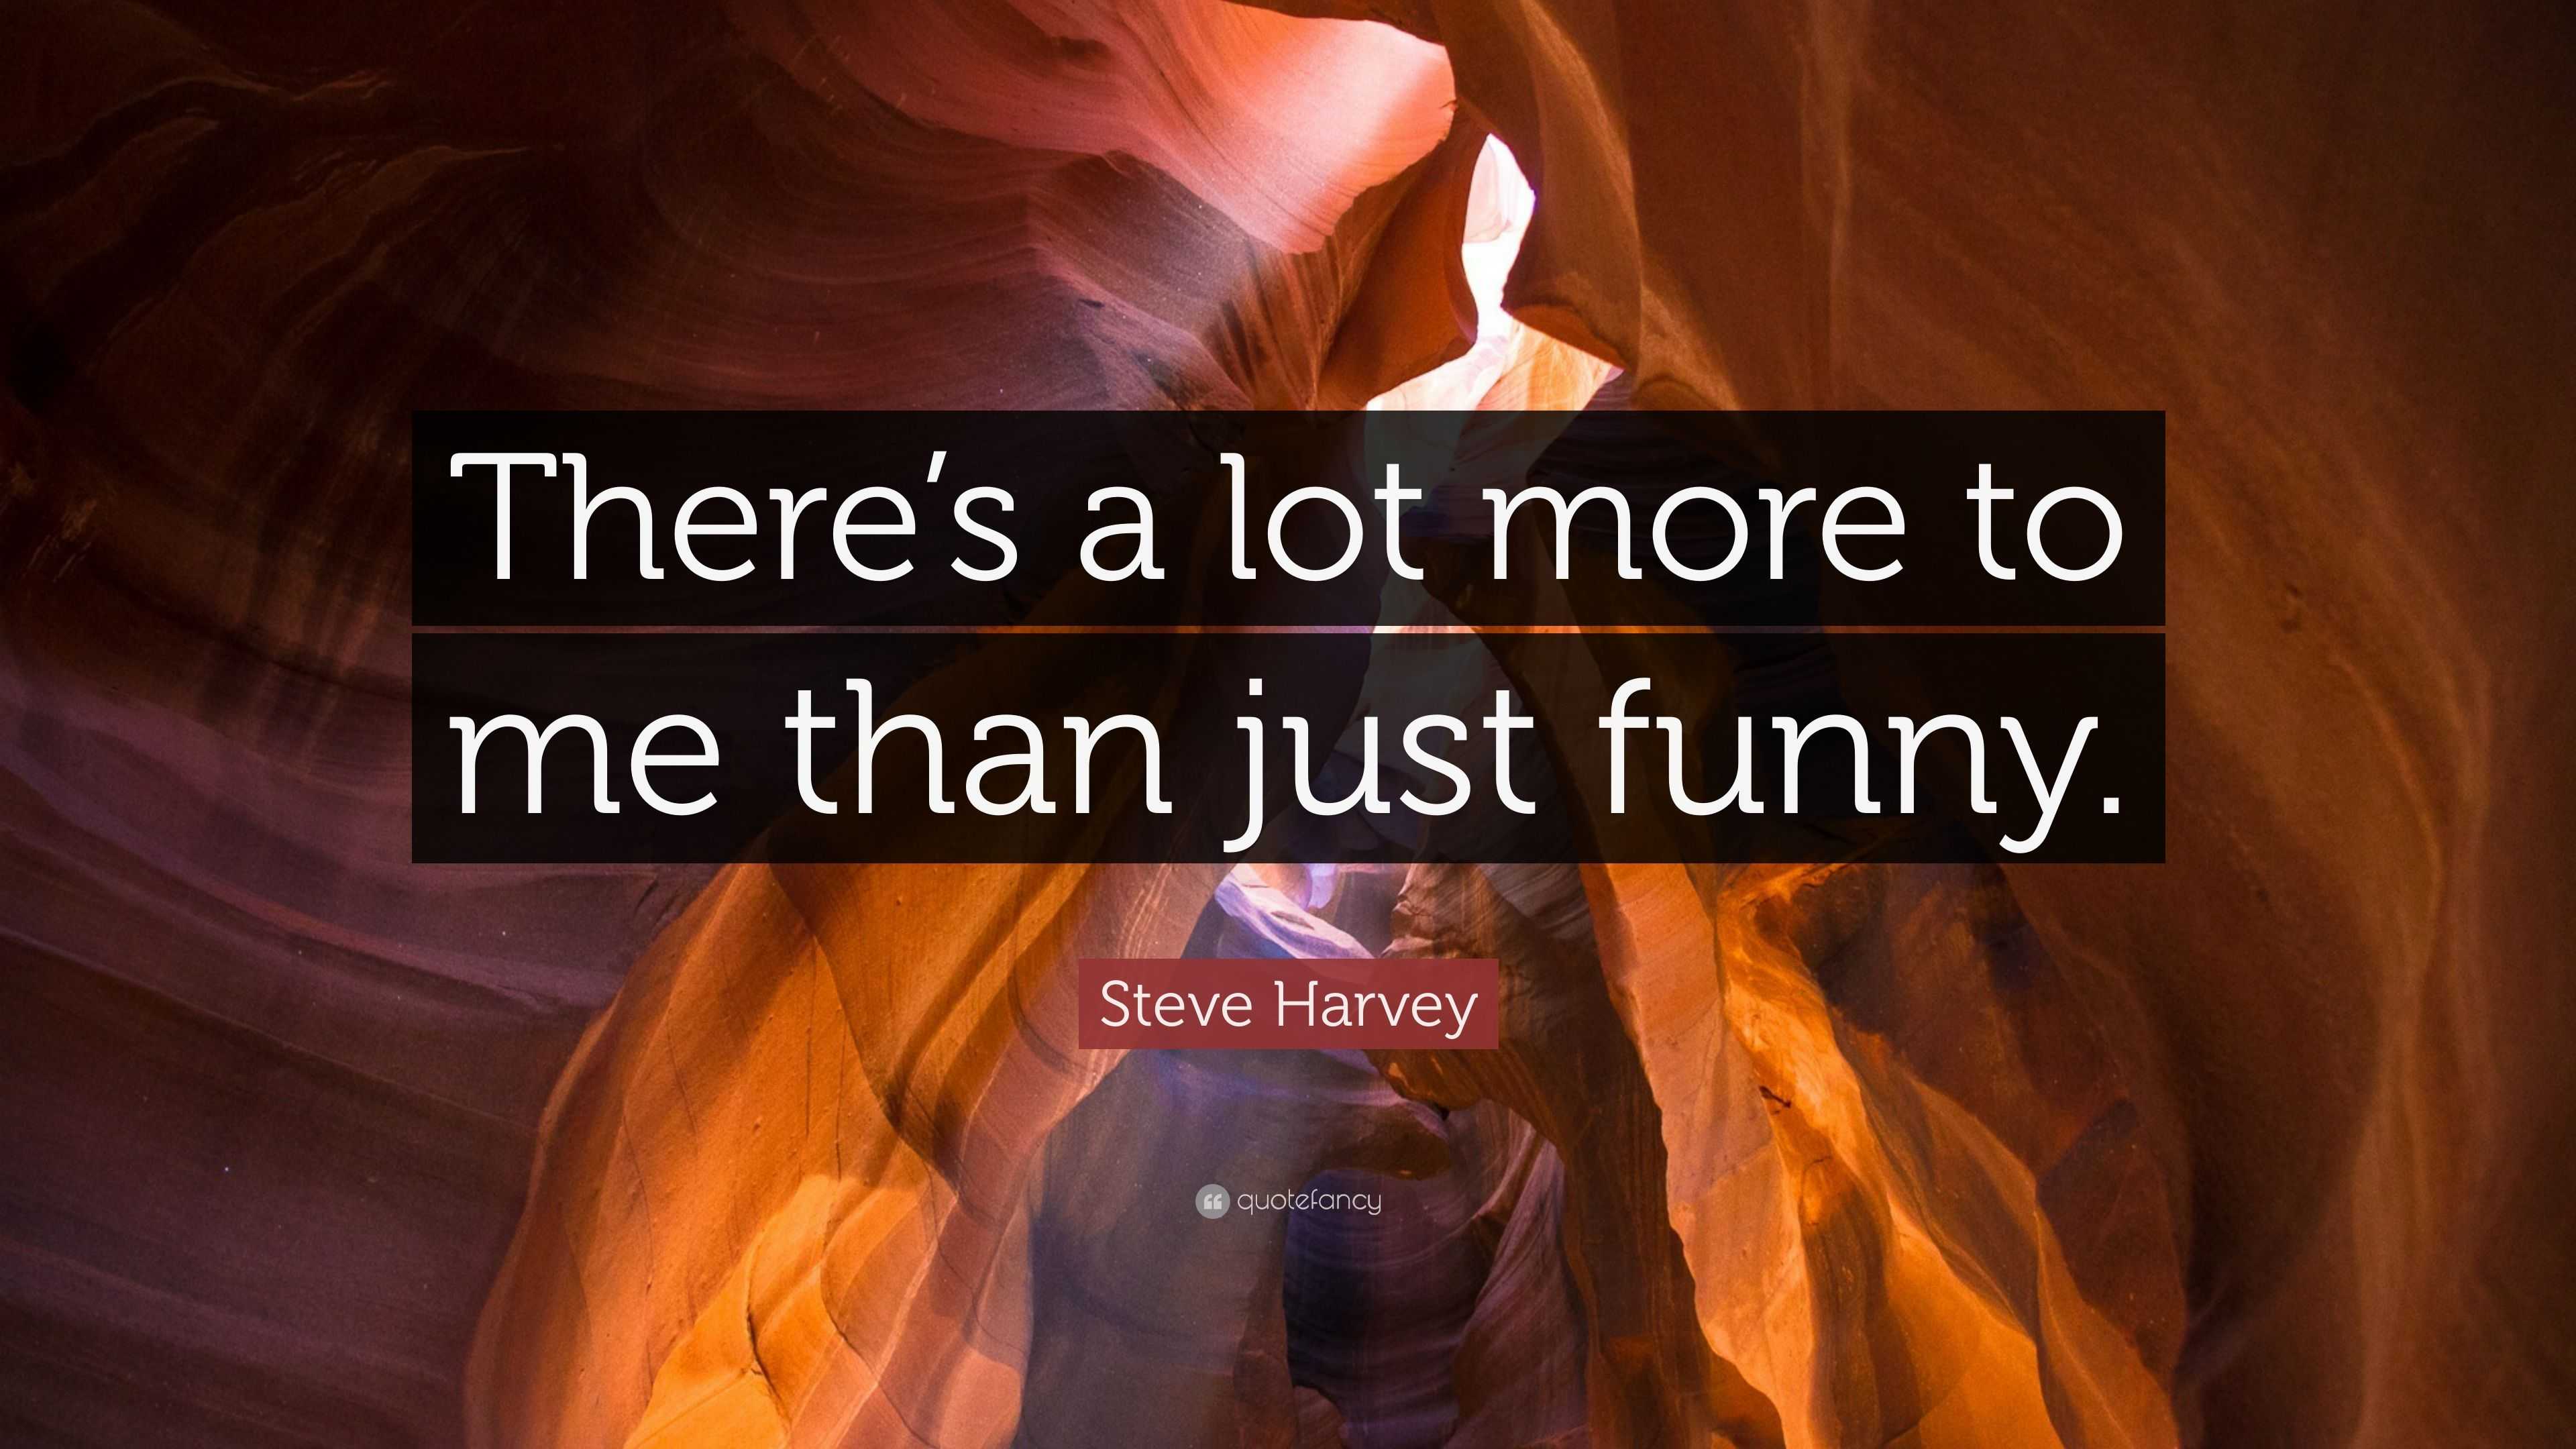 Steve Harvey Quote: “There's a lot more to me than just funny.”